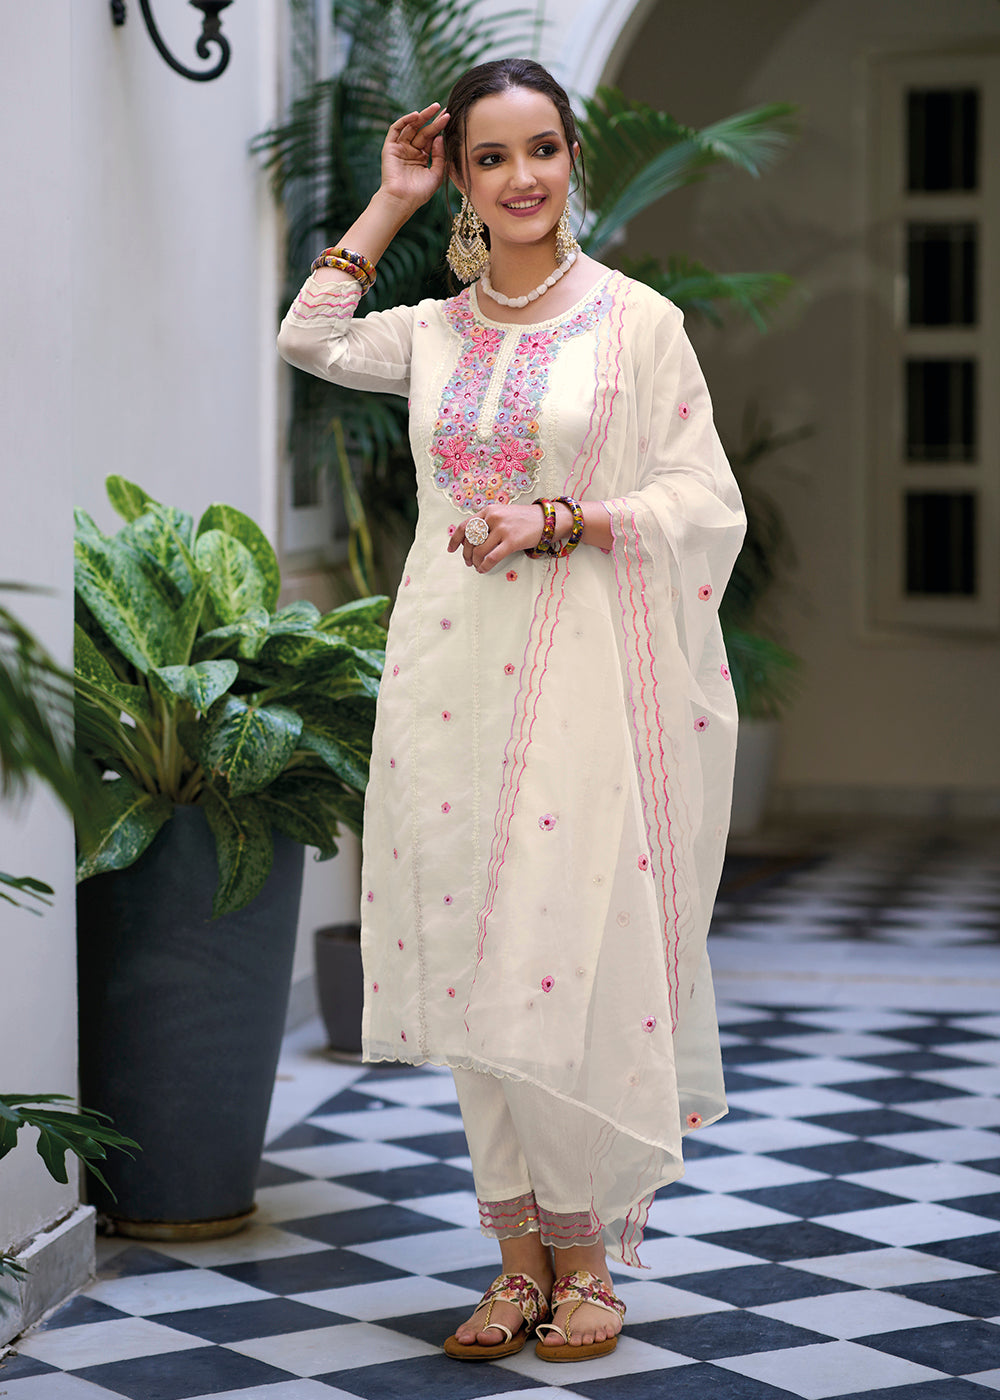 Buy Now Off White Color Embroidered Organza Pant Style Salwar Suit Online in USA, UK, Canada, Germany, Australia & Worldwide at Empress Clothing.